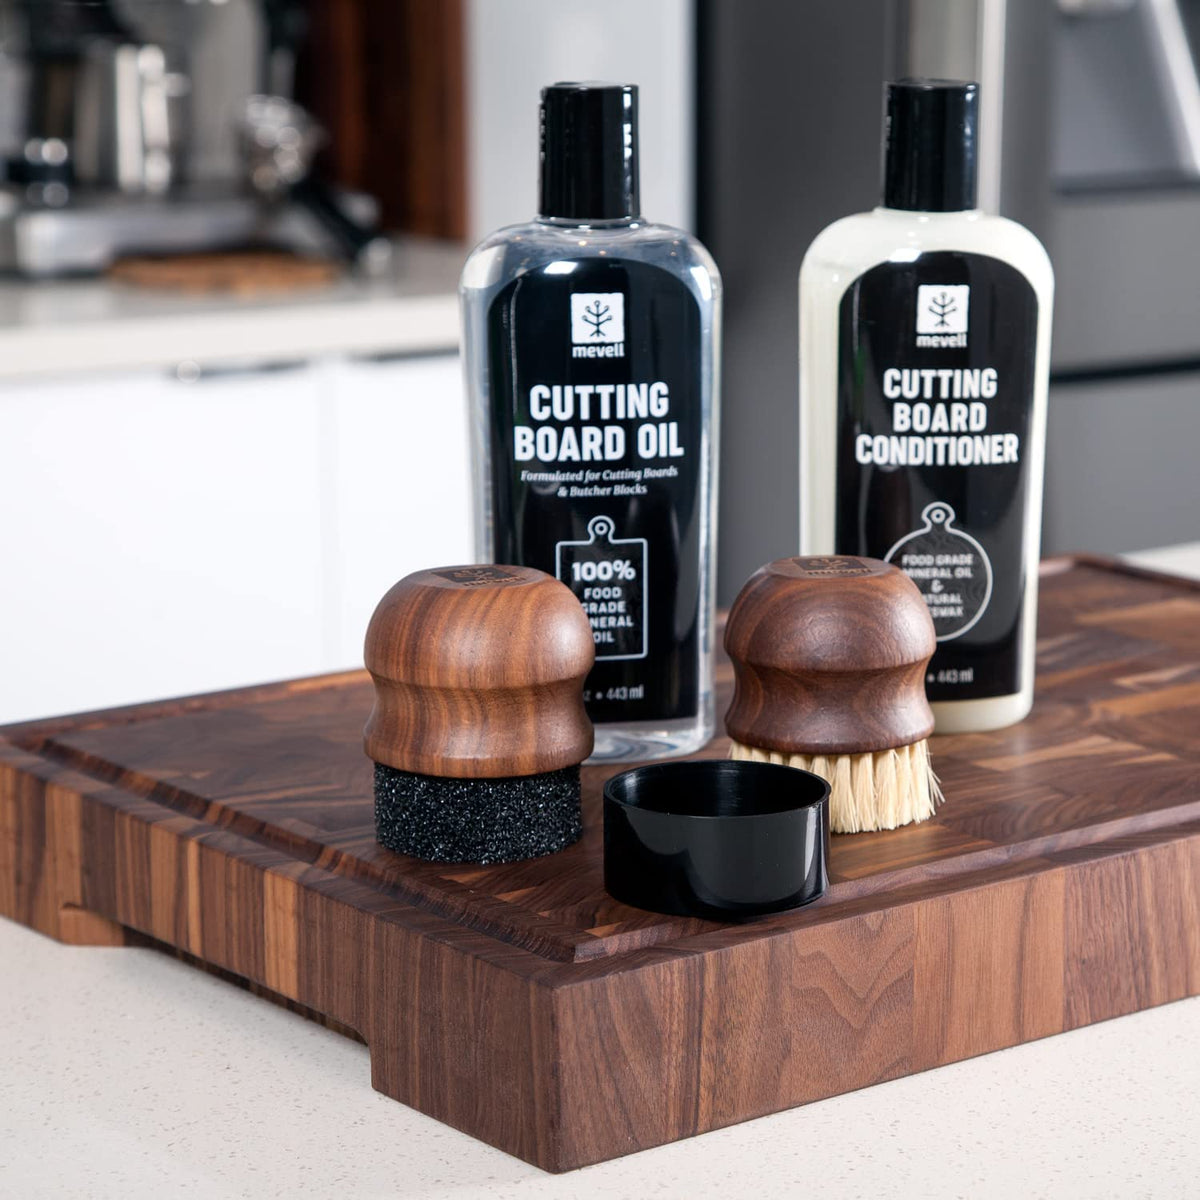 cutting board care products from Mevell